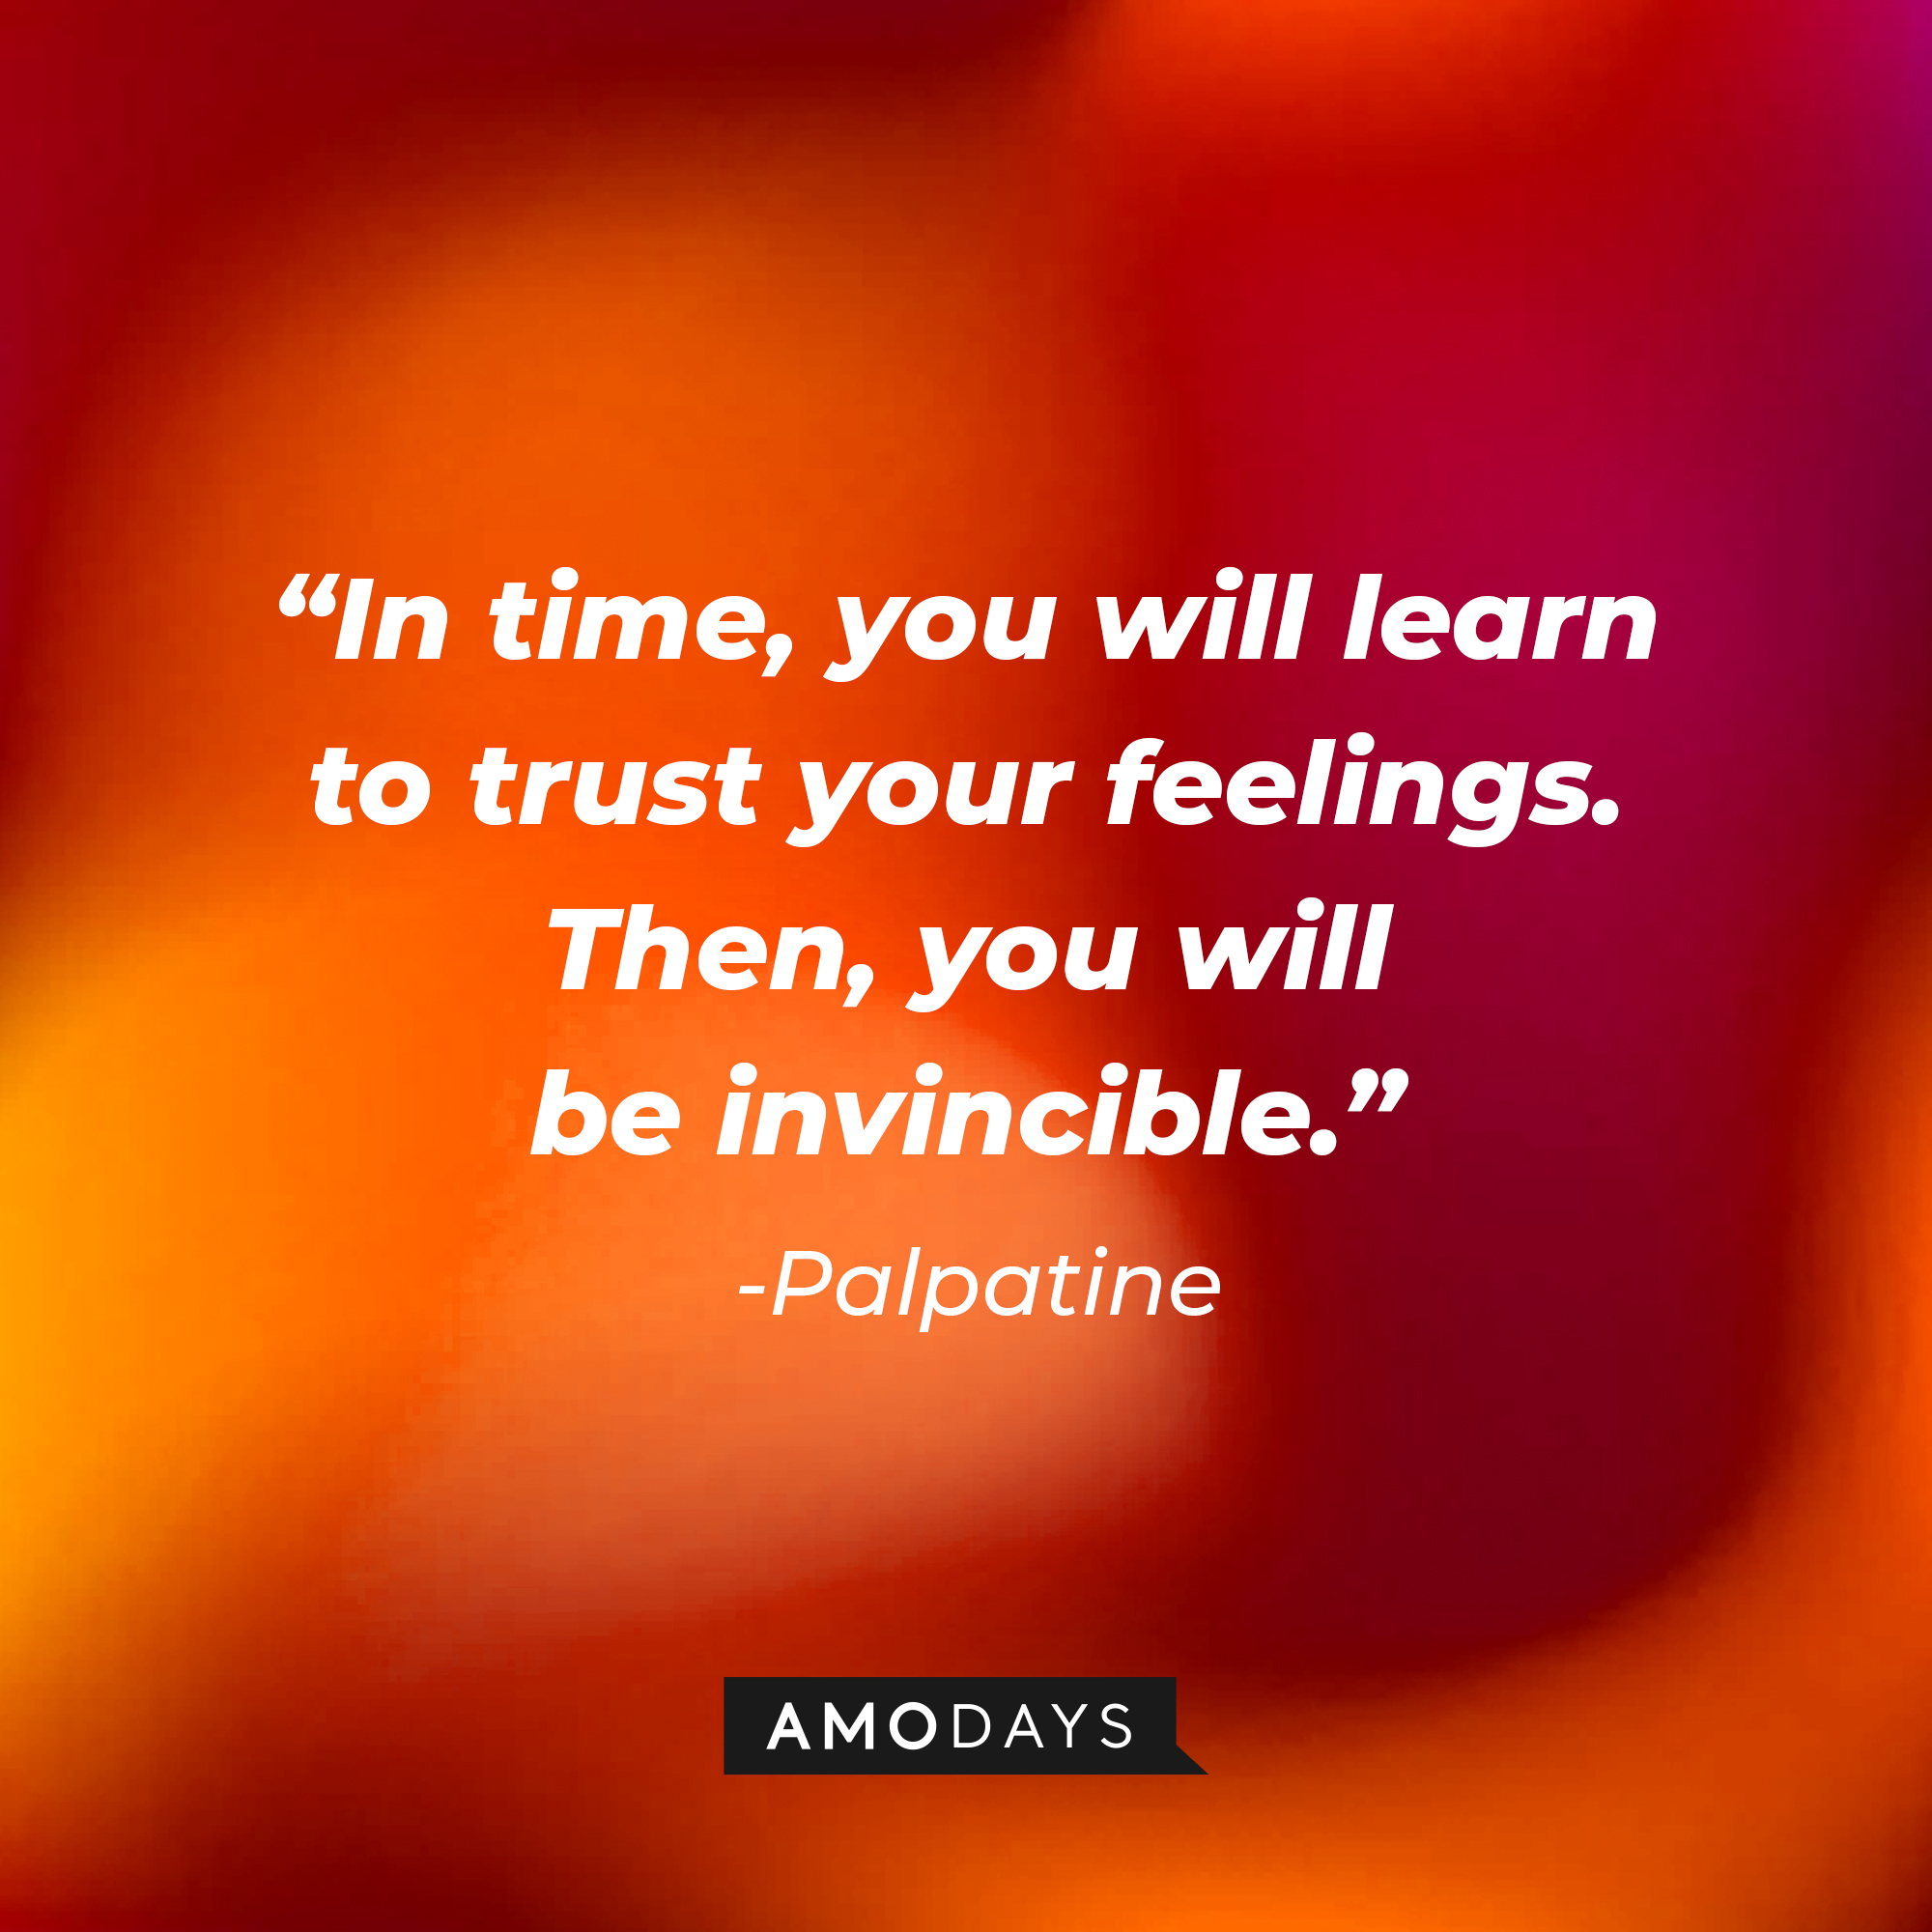 Palpatine’s quote: “In time, you will learn to trust your feelings. Then, you will be invincible.”  | Source: AmoDays